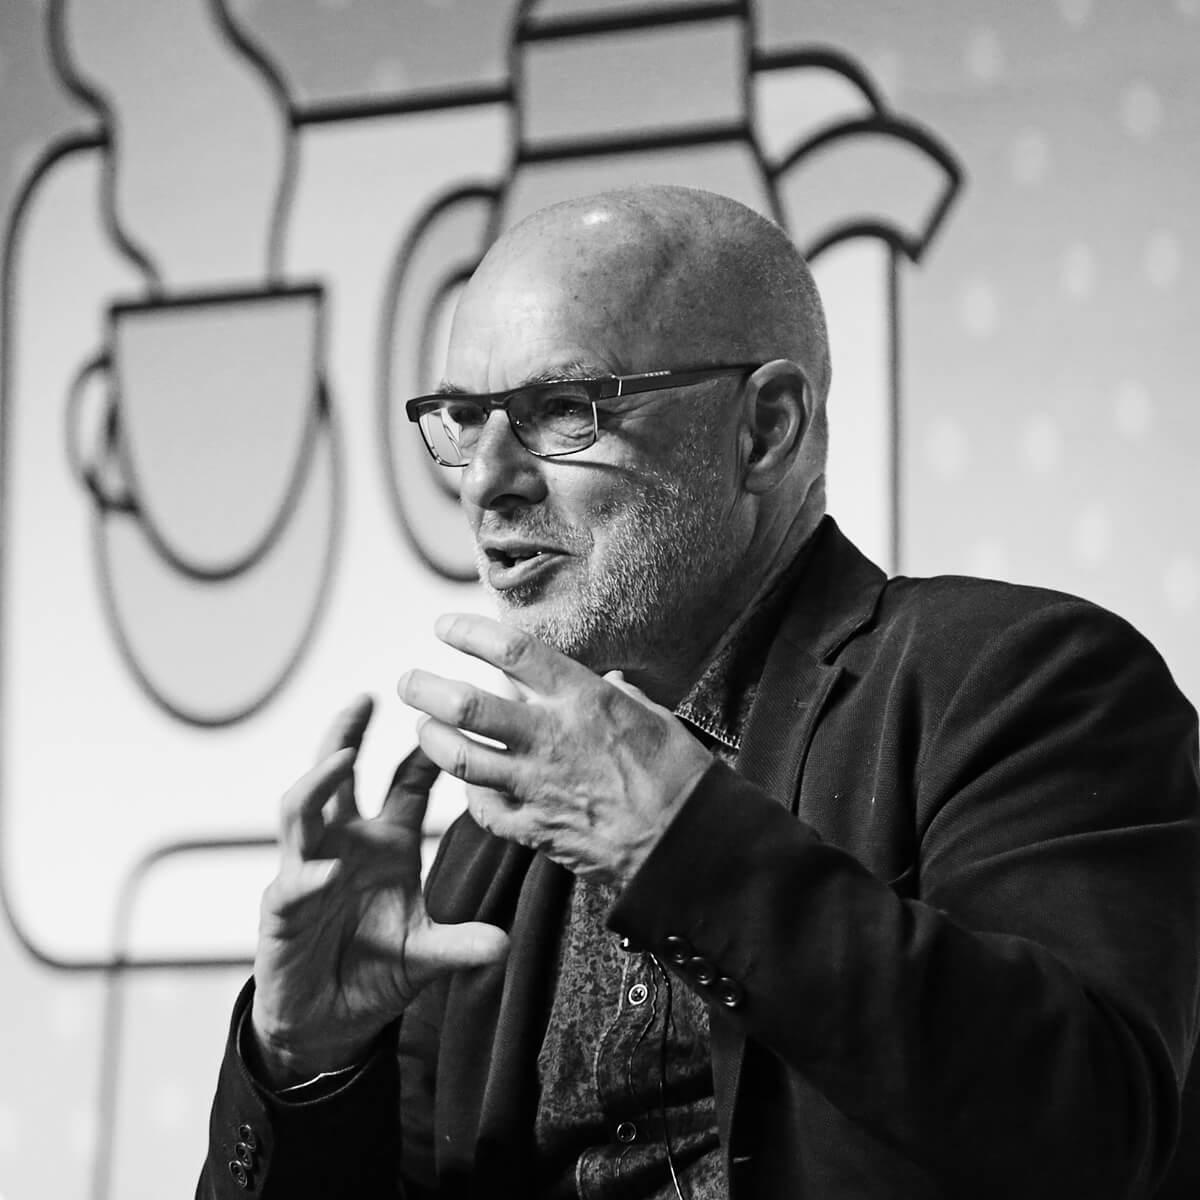 Photograph of Brian Eno (musician) at Cannes Lions 2017 by Julian Hanford